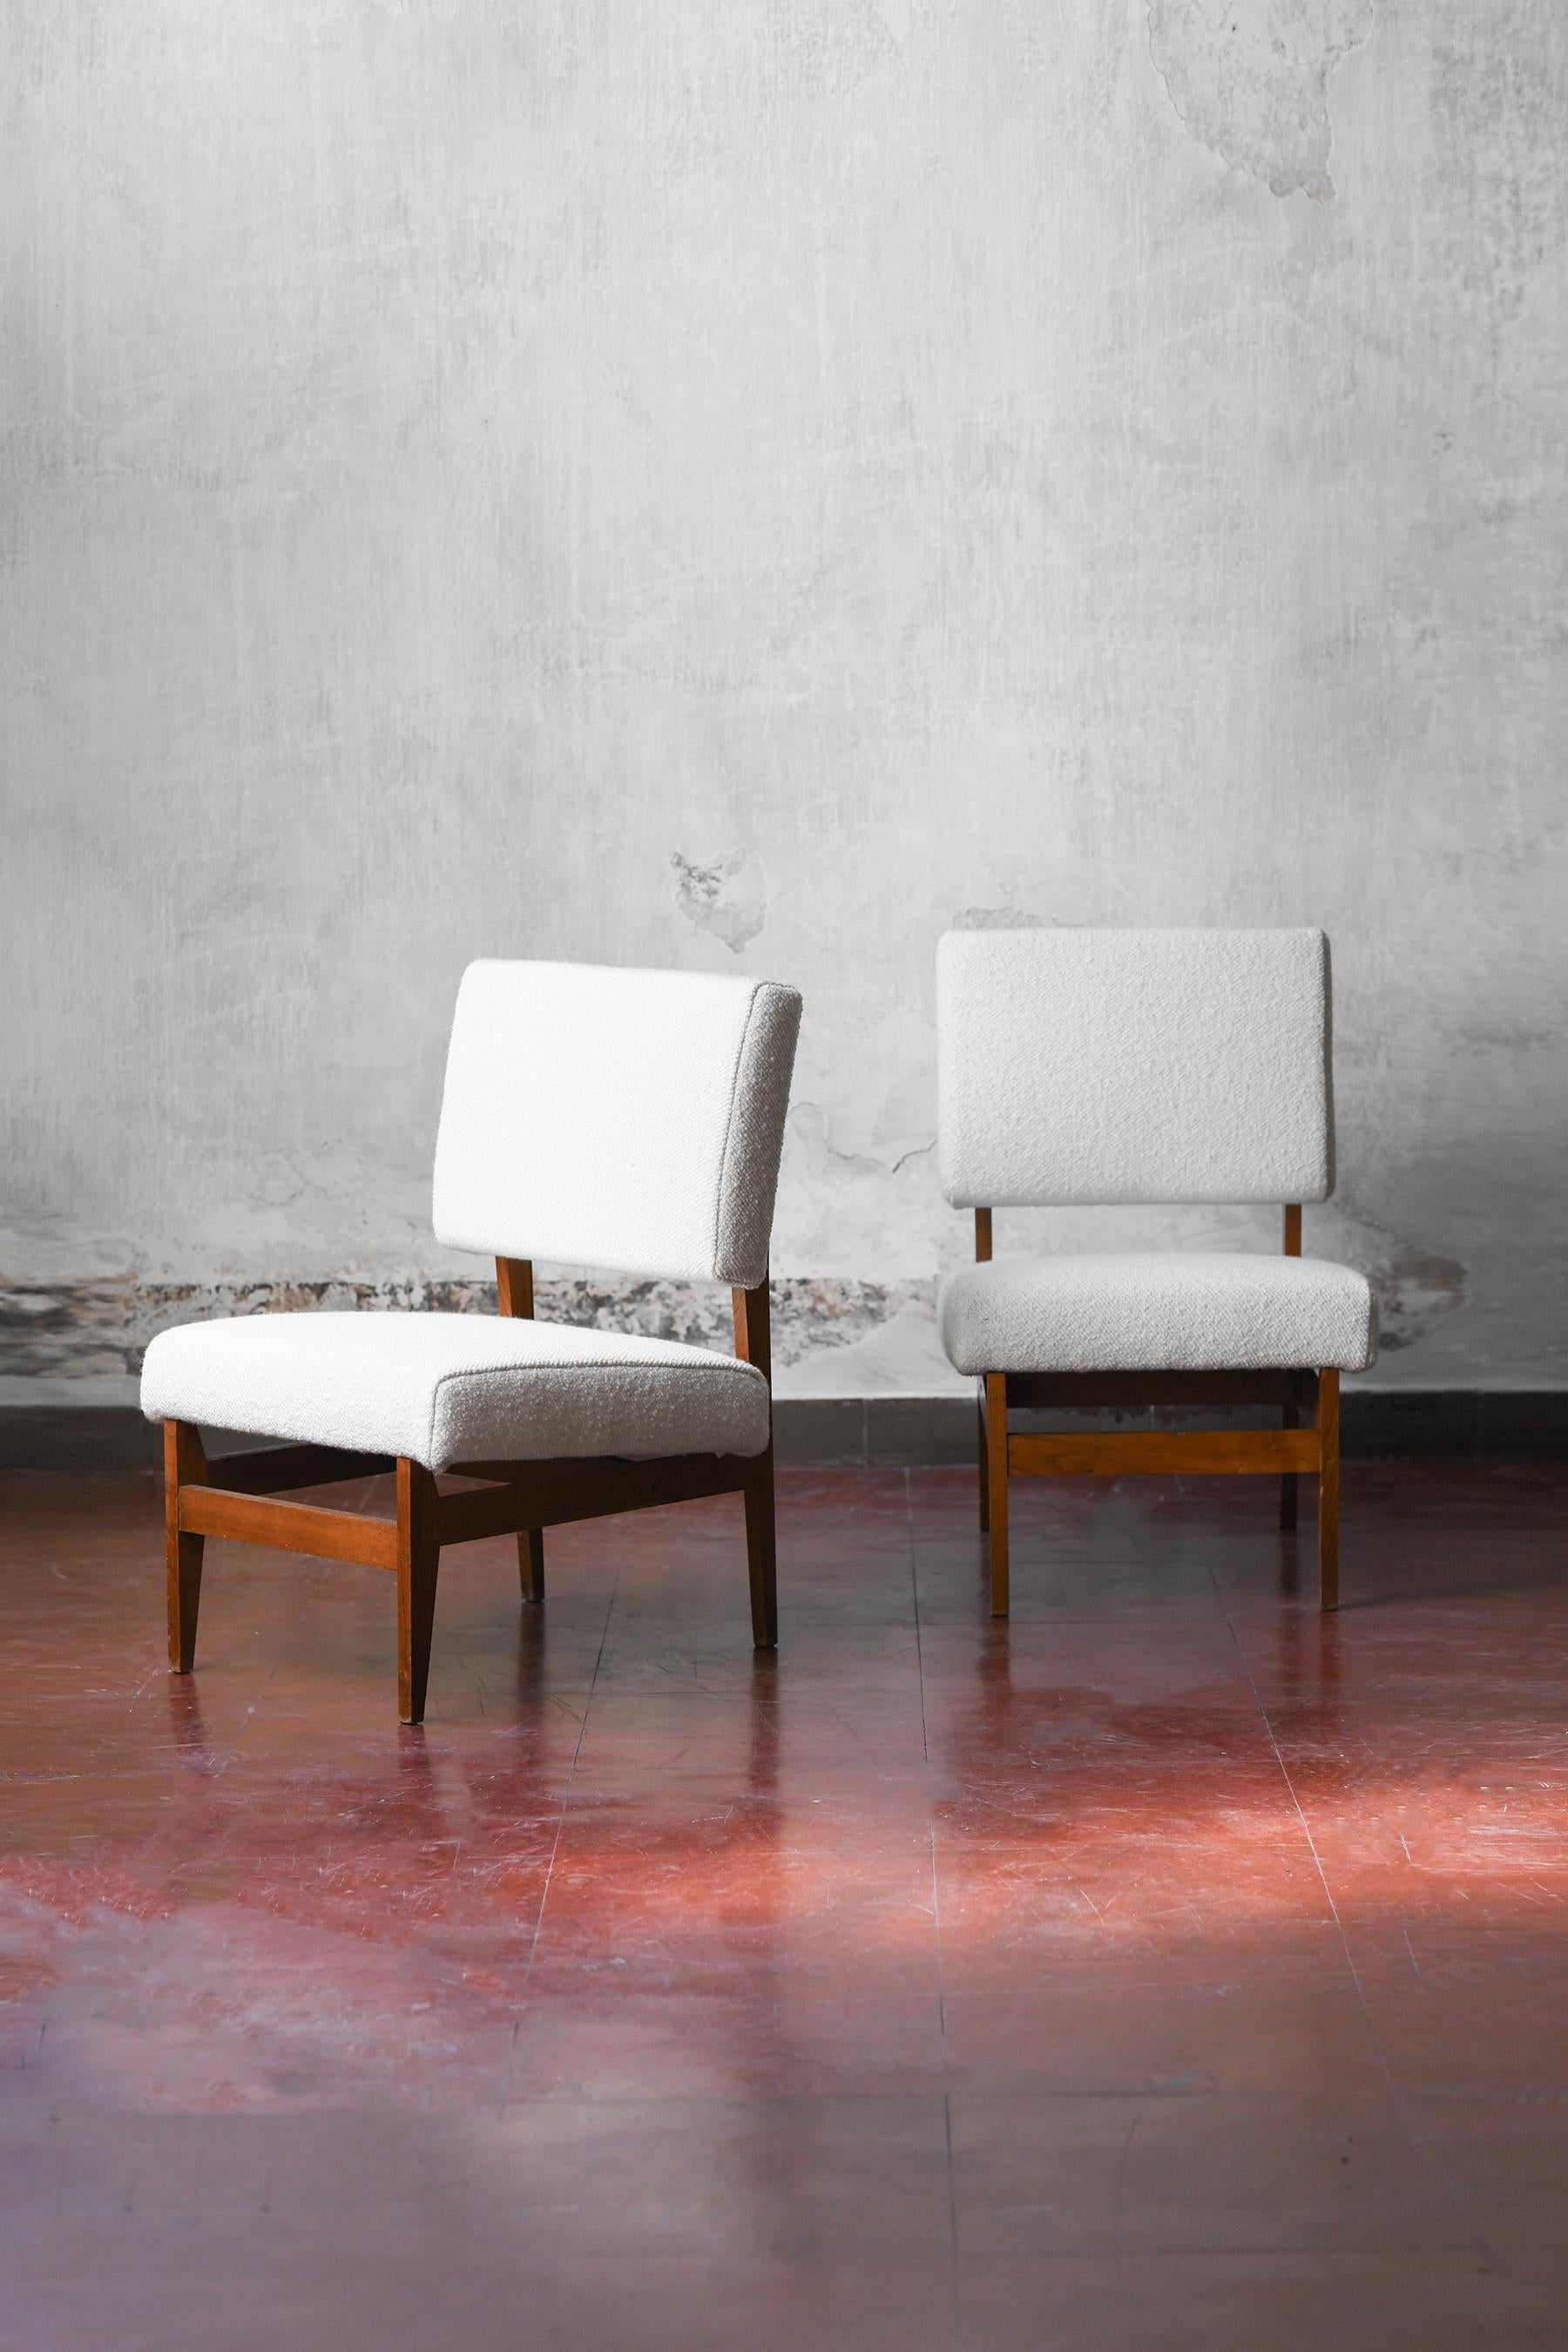 Pair of Mid-Century armchairs.
Attributed to Edmondo Palutari for Dassi Mobili Moderni, Italy 1950
Product details
Covered with Dedar fabric. Wooden structure.
Dimensions 50 L x 78 H x 56 D cm
Sold as set of 2.